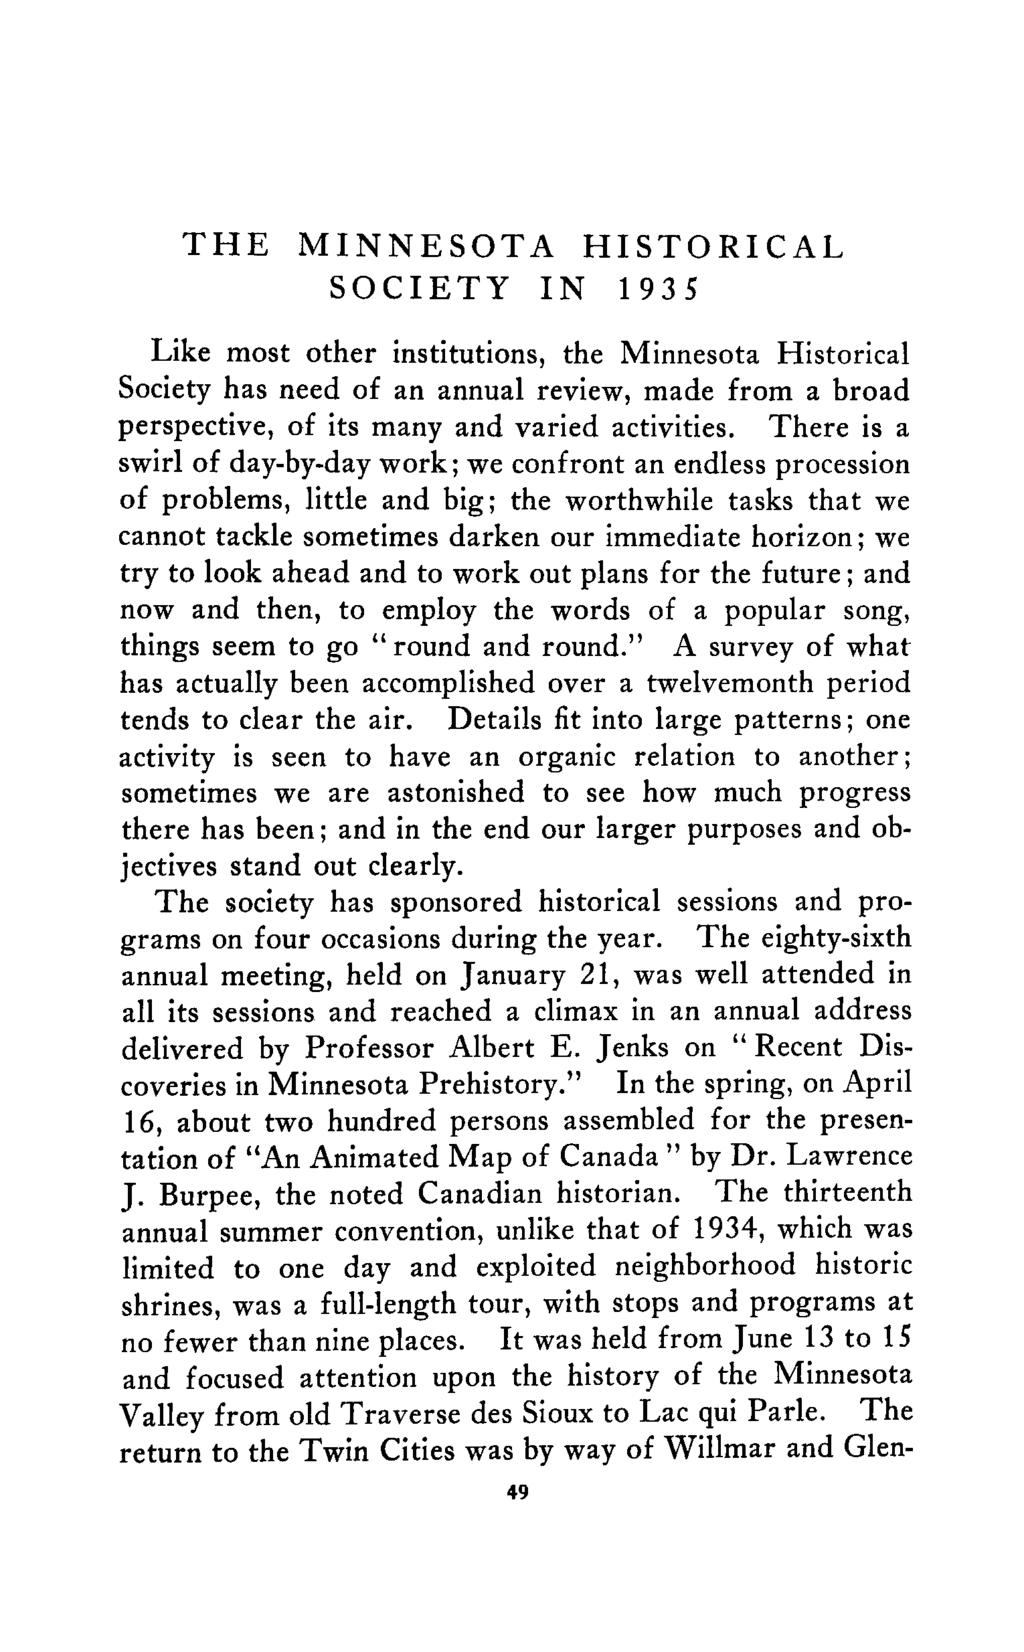 THE MINNESOTA HISTORICAL SOCIETY IN 1935 Like most other institutions, the Minnesota Historical Society has need of an annual review, made from a broad perspective, of its many and varied activities.